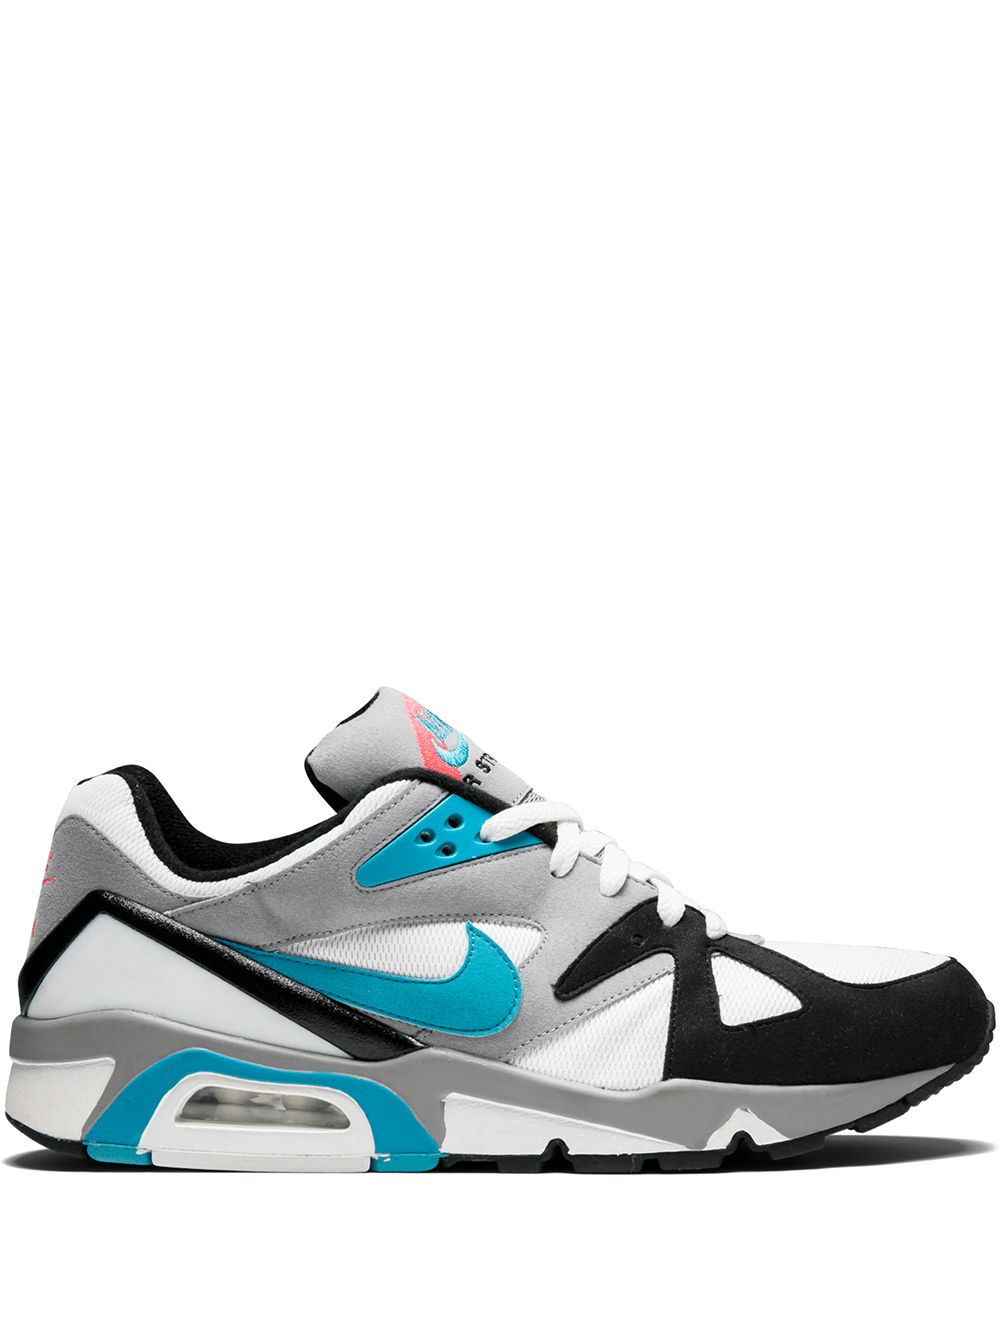 NIKE AIR STRUCTURE TRIAX 91 trainers